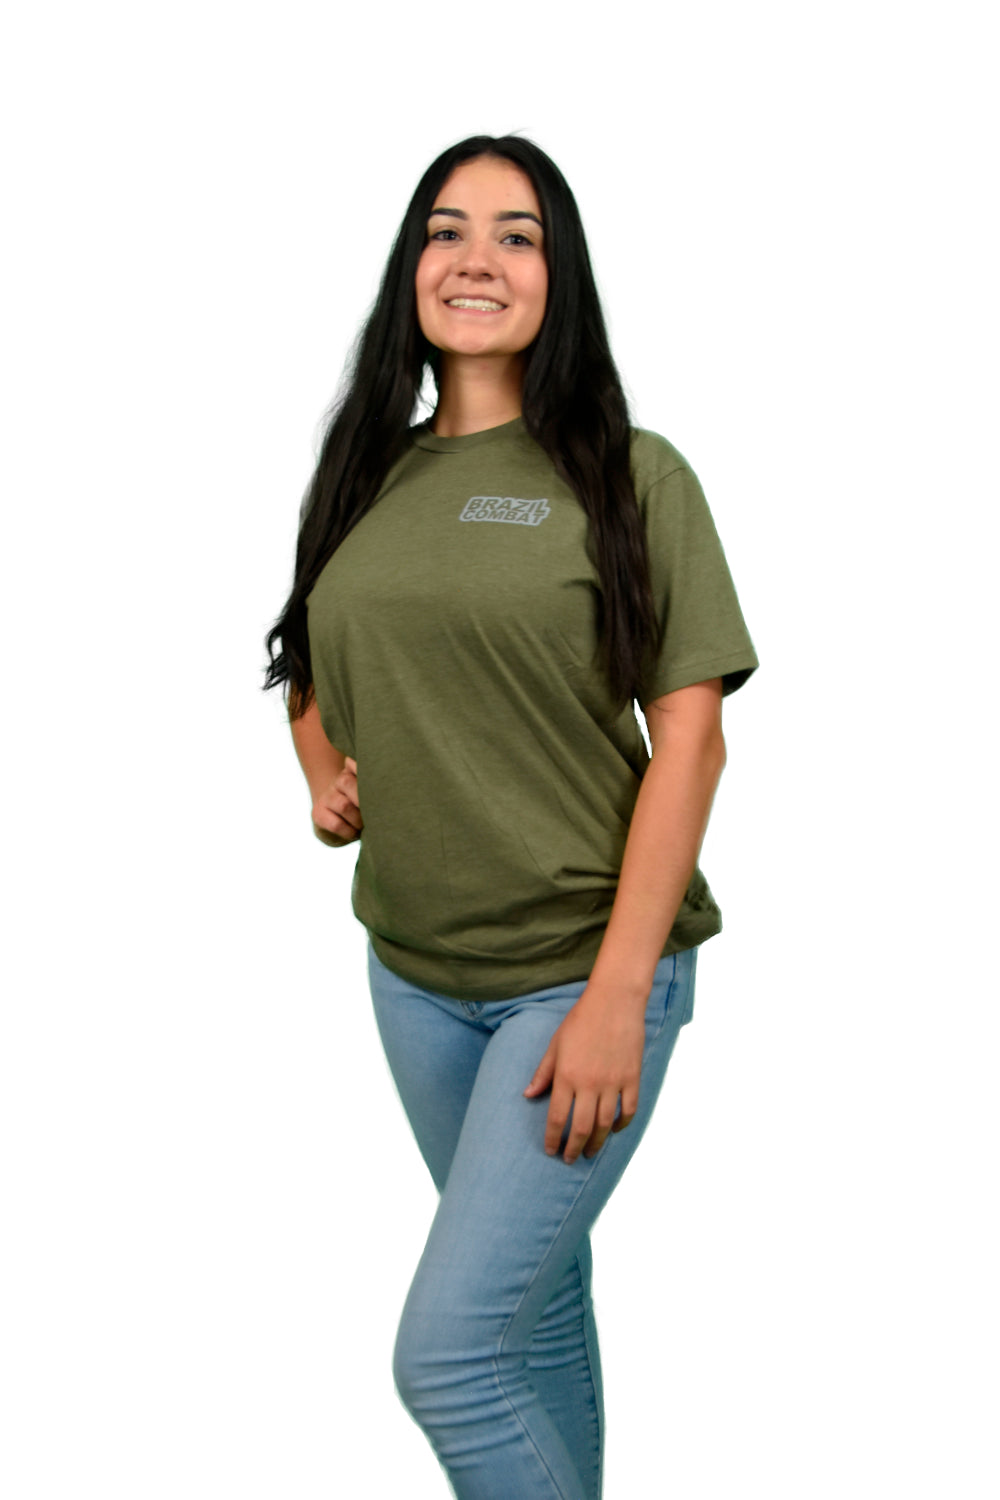 Brazil Combat Female T-Shirt - Stylish, Breathable, and Durable - Ideal for Workouts - Everyday Wear – Fashion forward Looks - Perfect for Layering